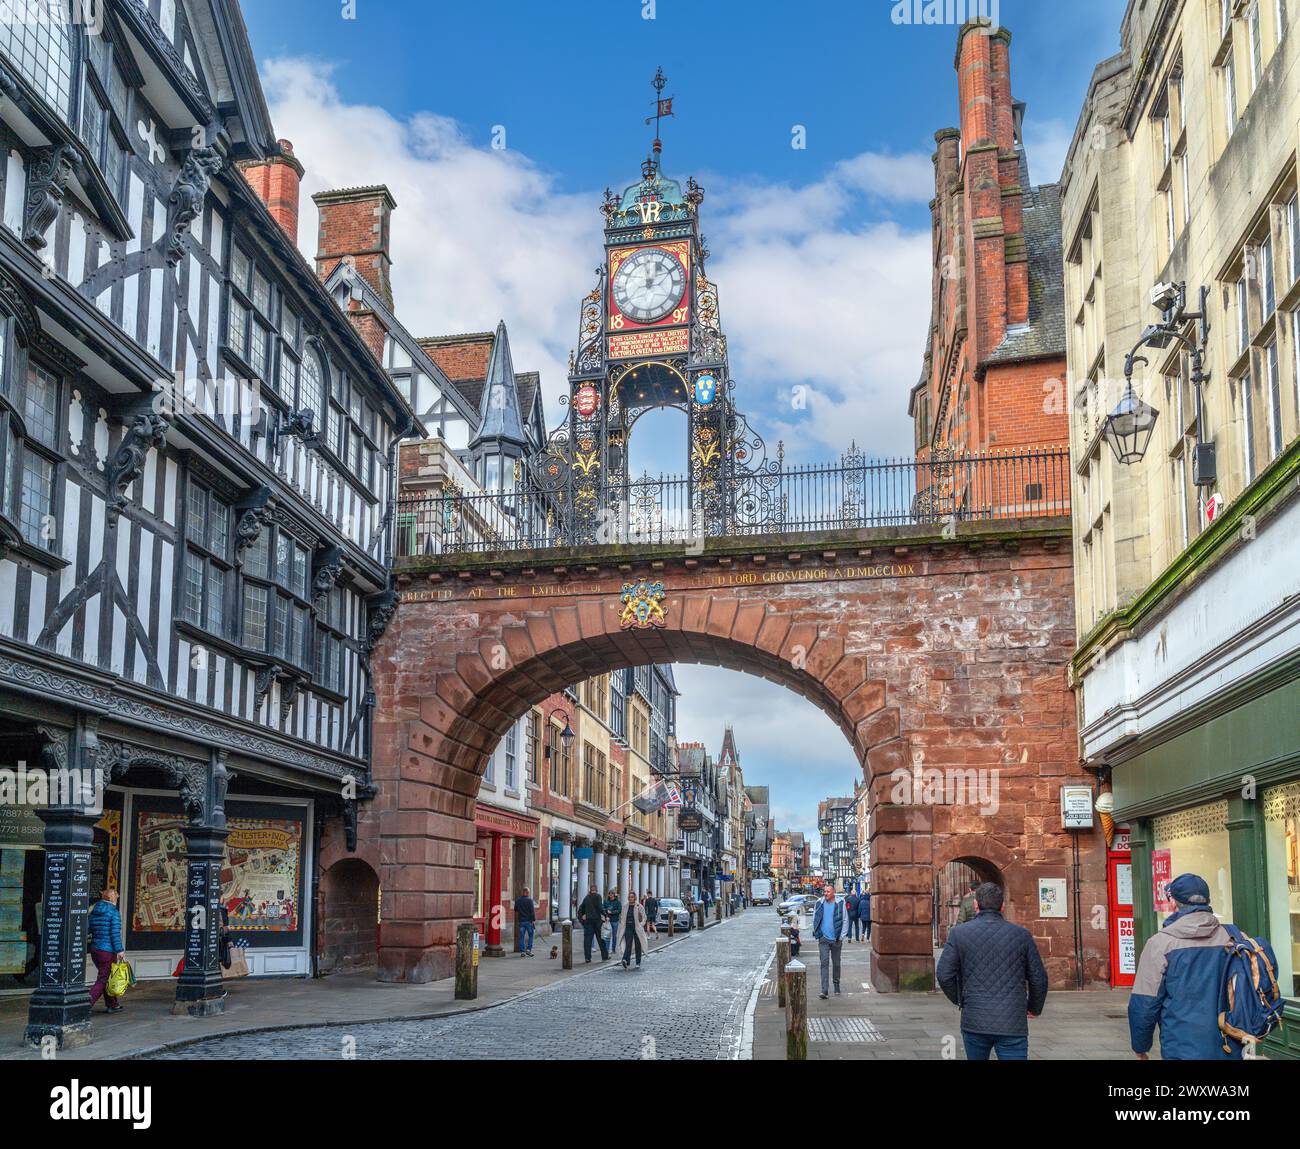 The Eastgate Clock on Eastgate Street, Chester, Cheshire, England, UK Stock Photo